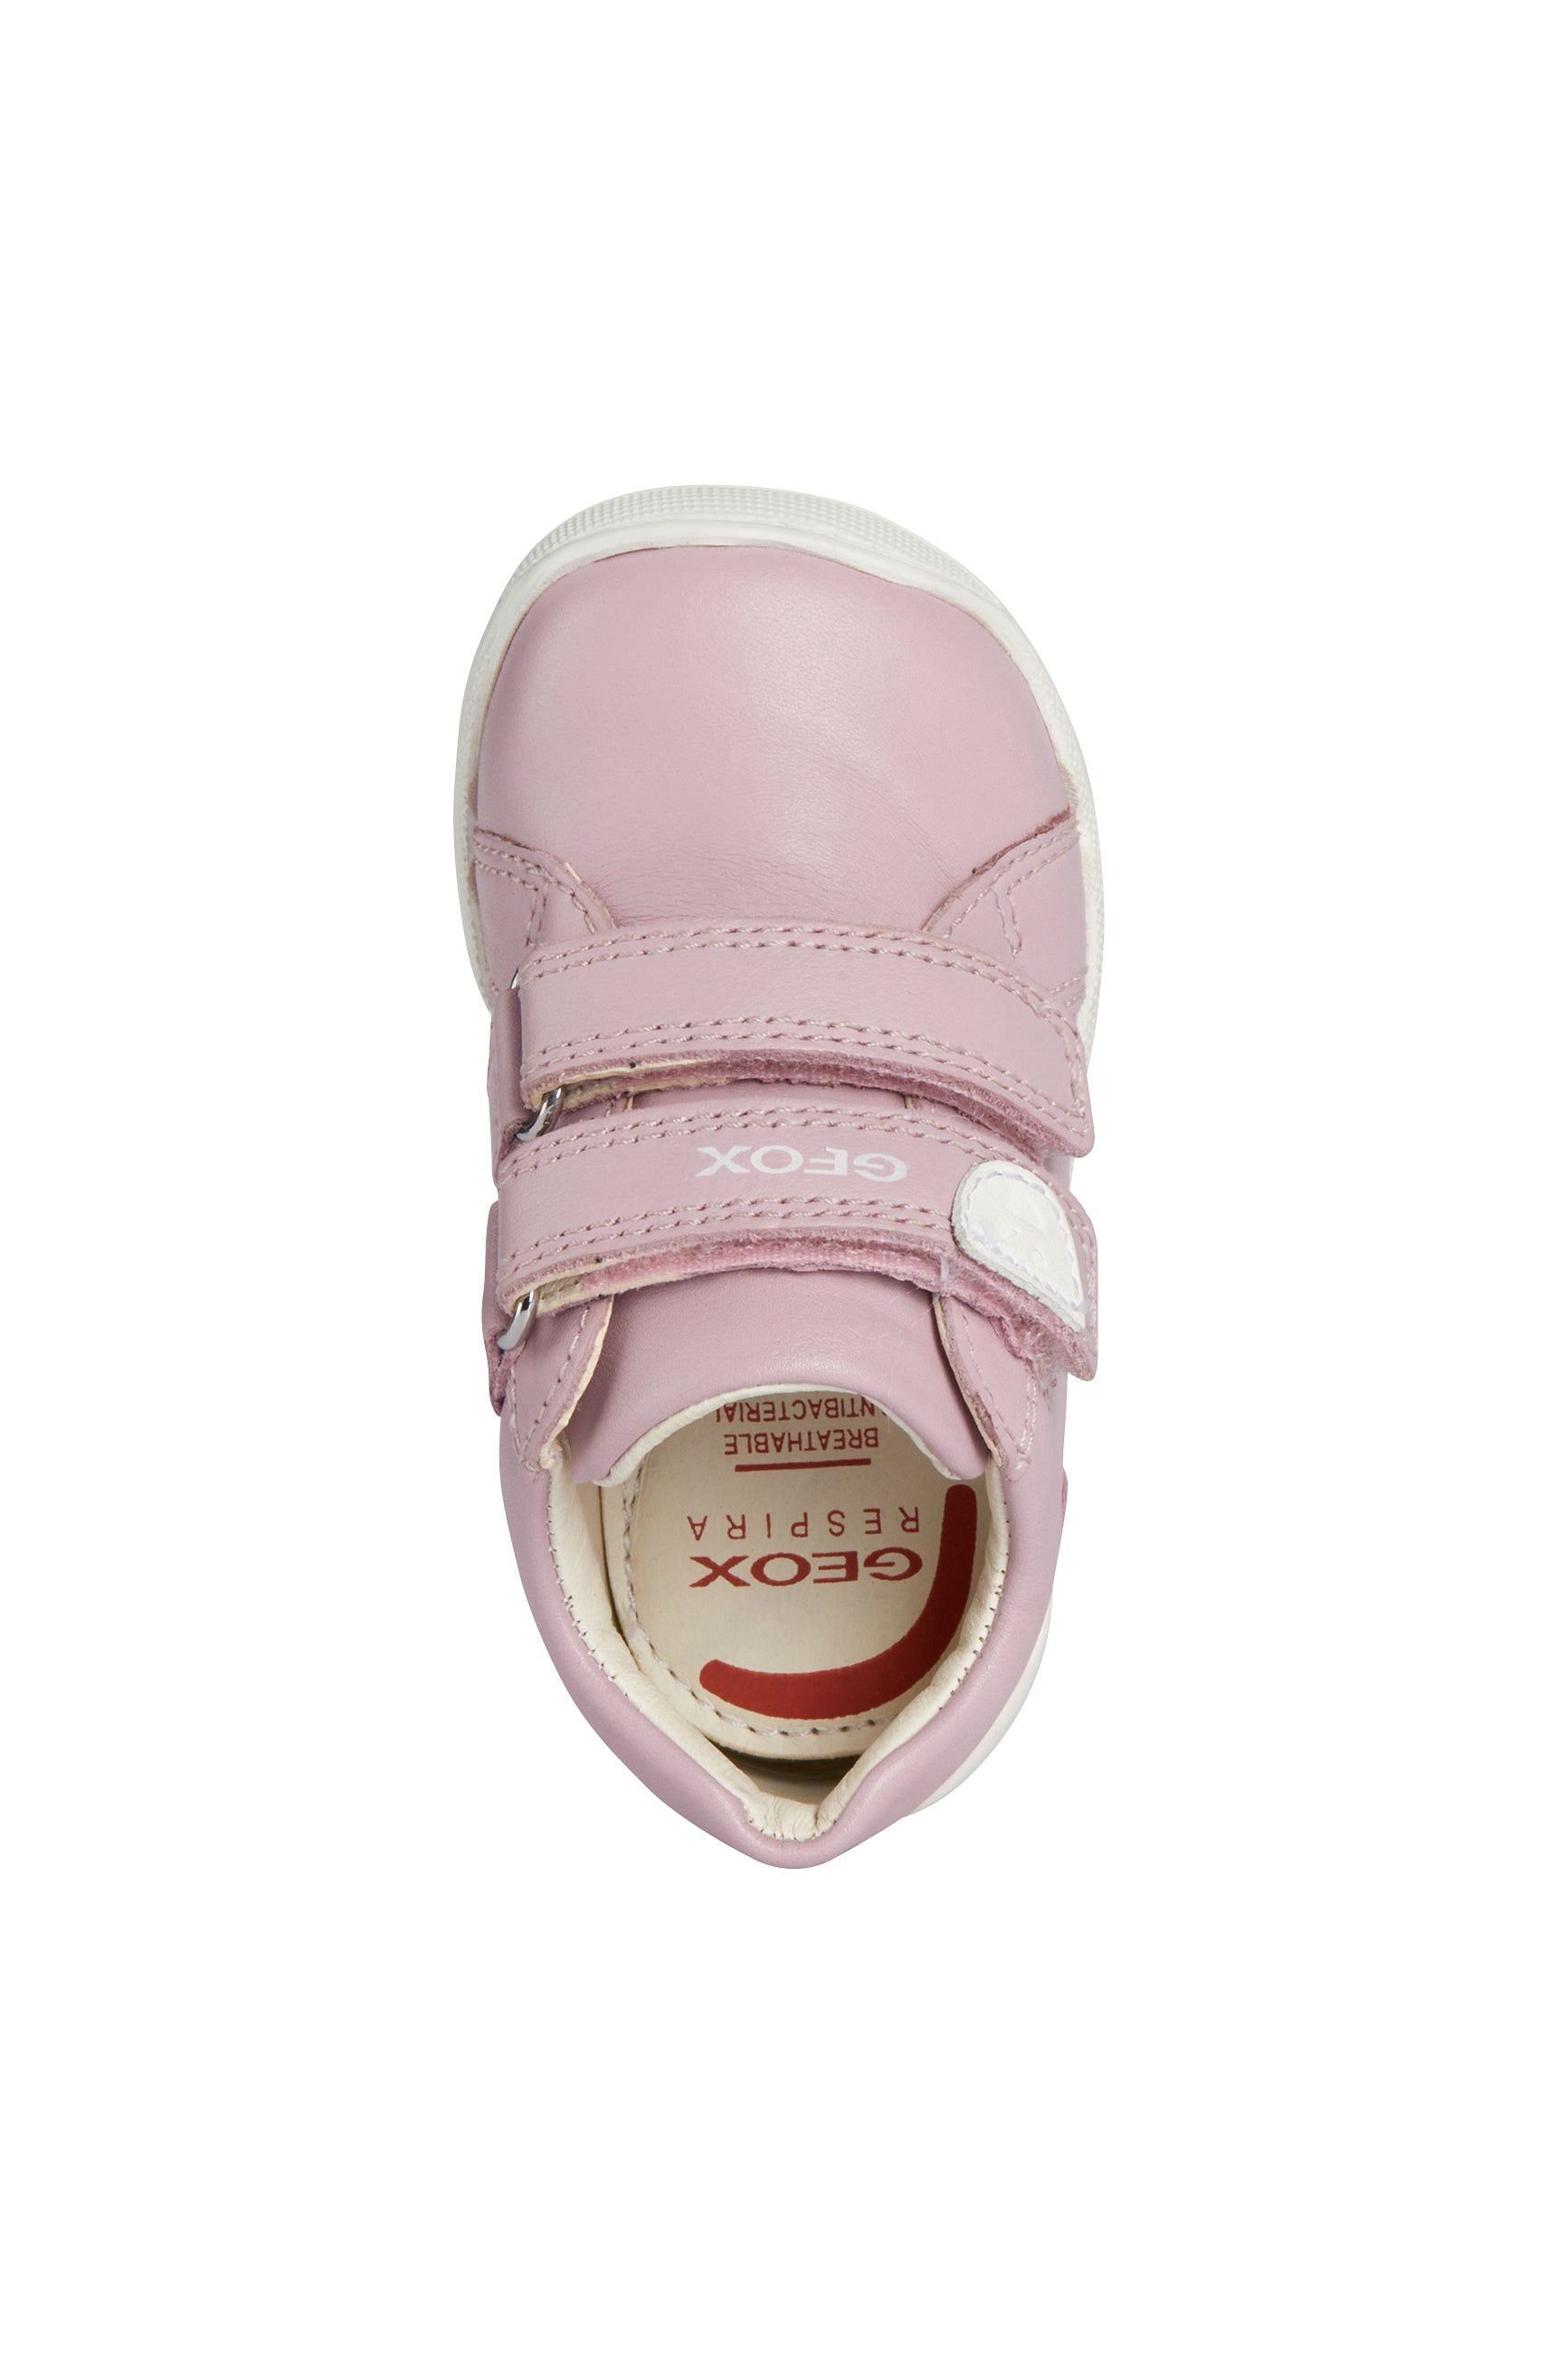 A girls shoe by Geox, style B Macchia, in pink leather with white trim and double velcro fastening. View from above.